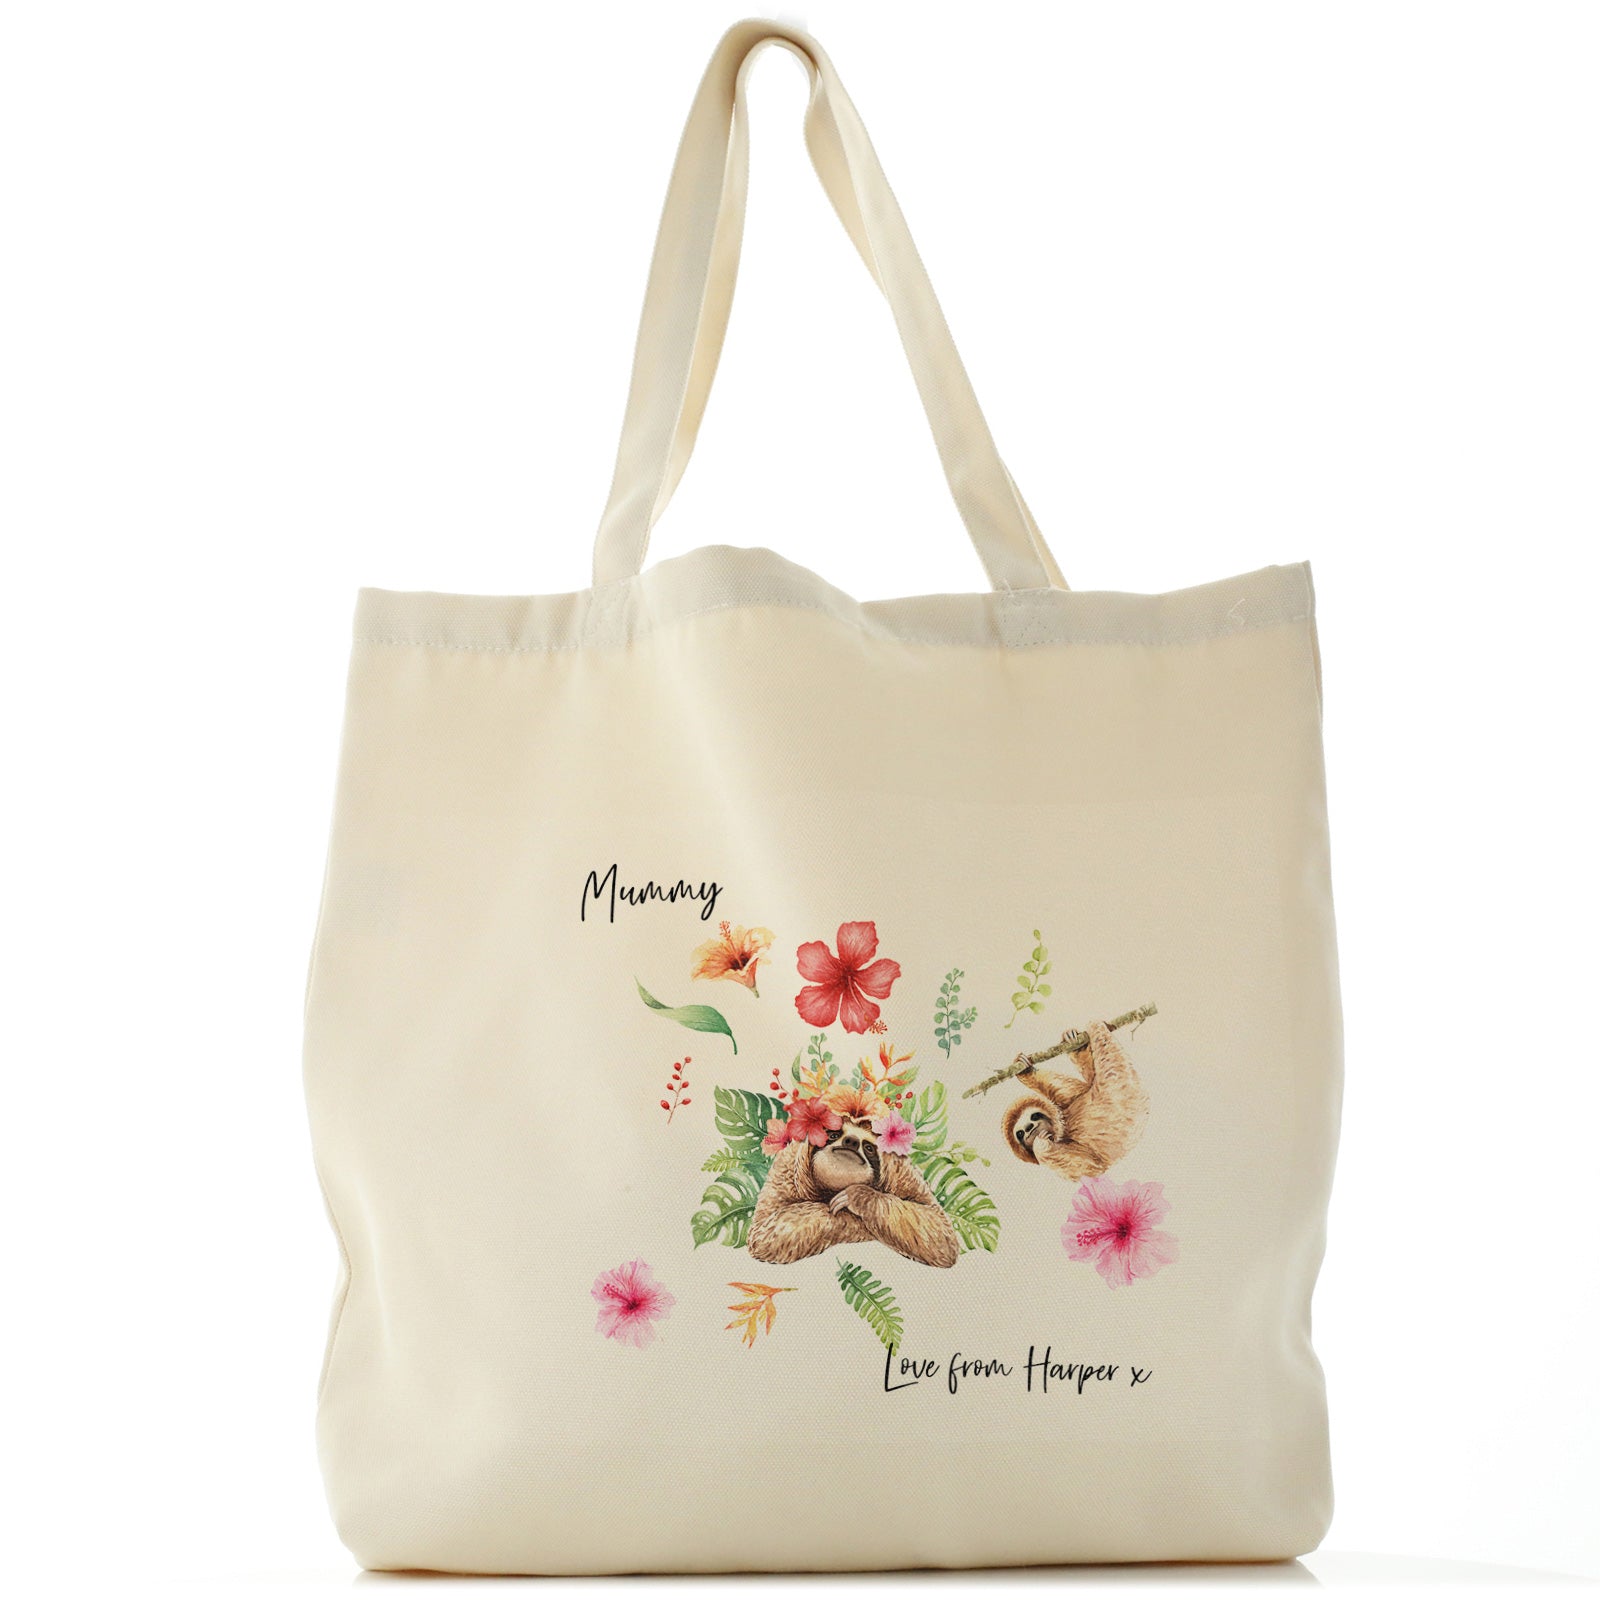 Personalised Canvas Tote Bag with Stylish Text and Floral Mum and Baby Sloths